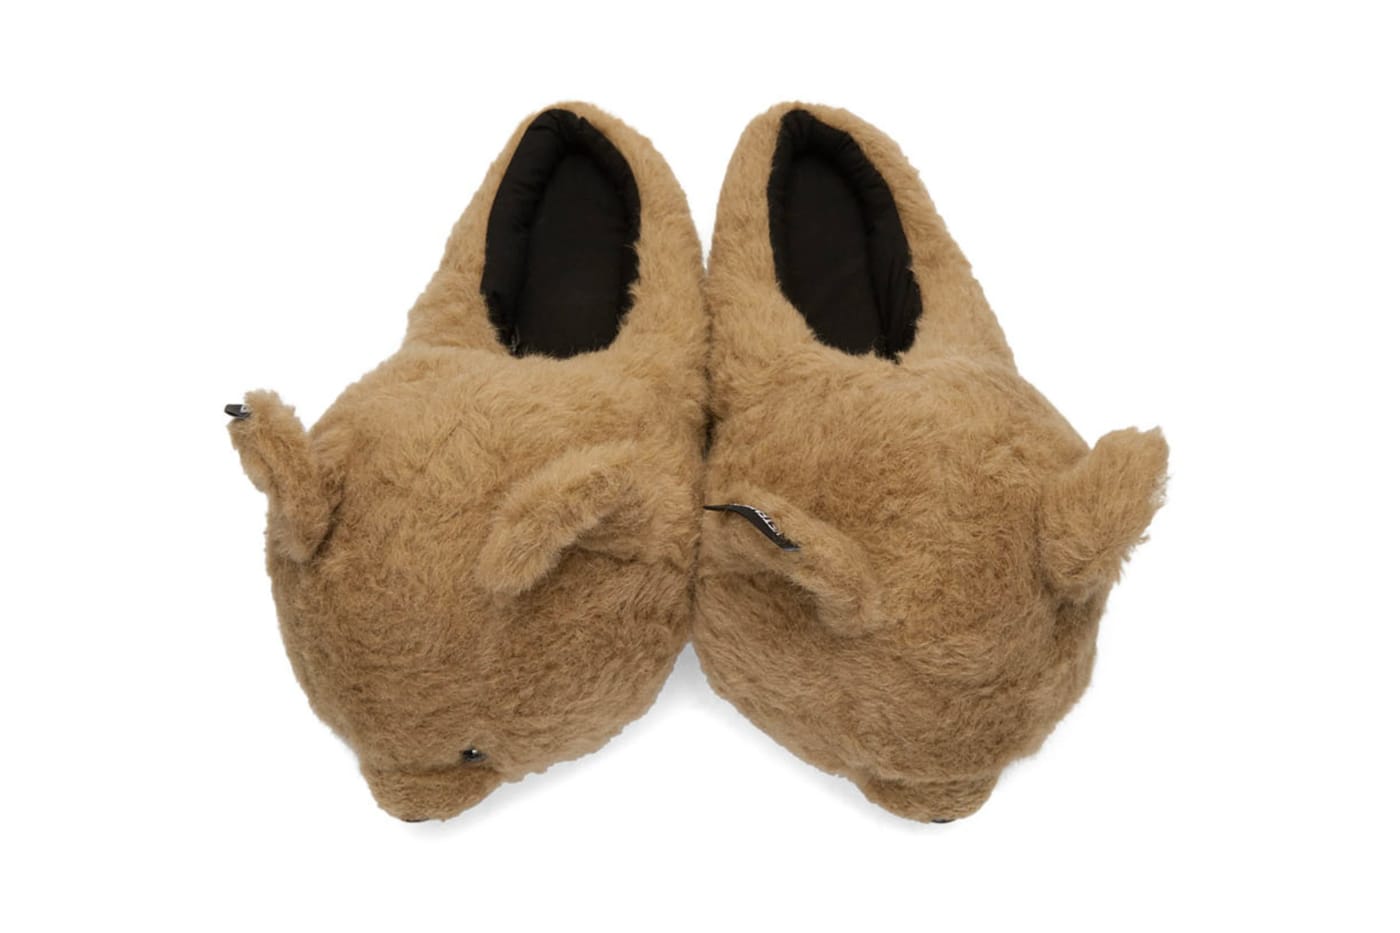 Buy Teddy Bear Slippers, Women Plush Cute Animal Slippers Home Indoor  Anti-Slip Faux Fur Soft Warm Winter Shoes, Black, One Size at Amazon.in